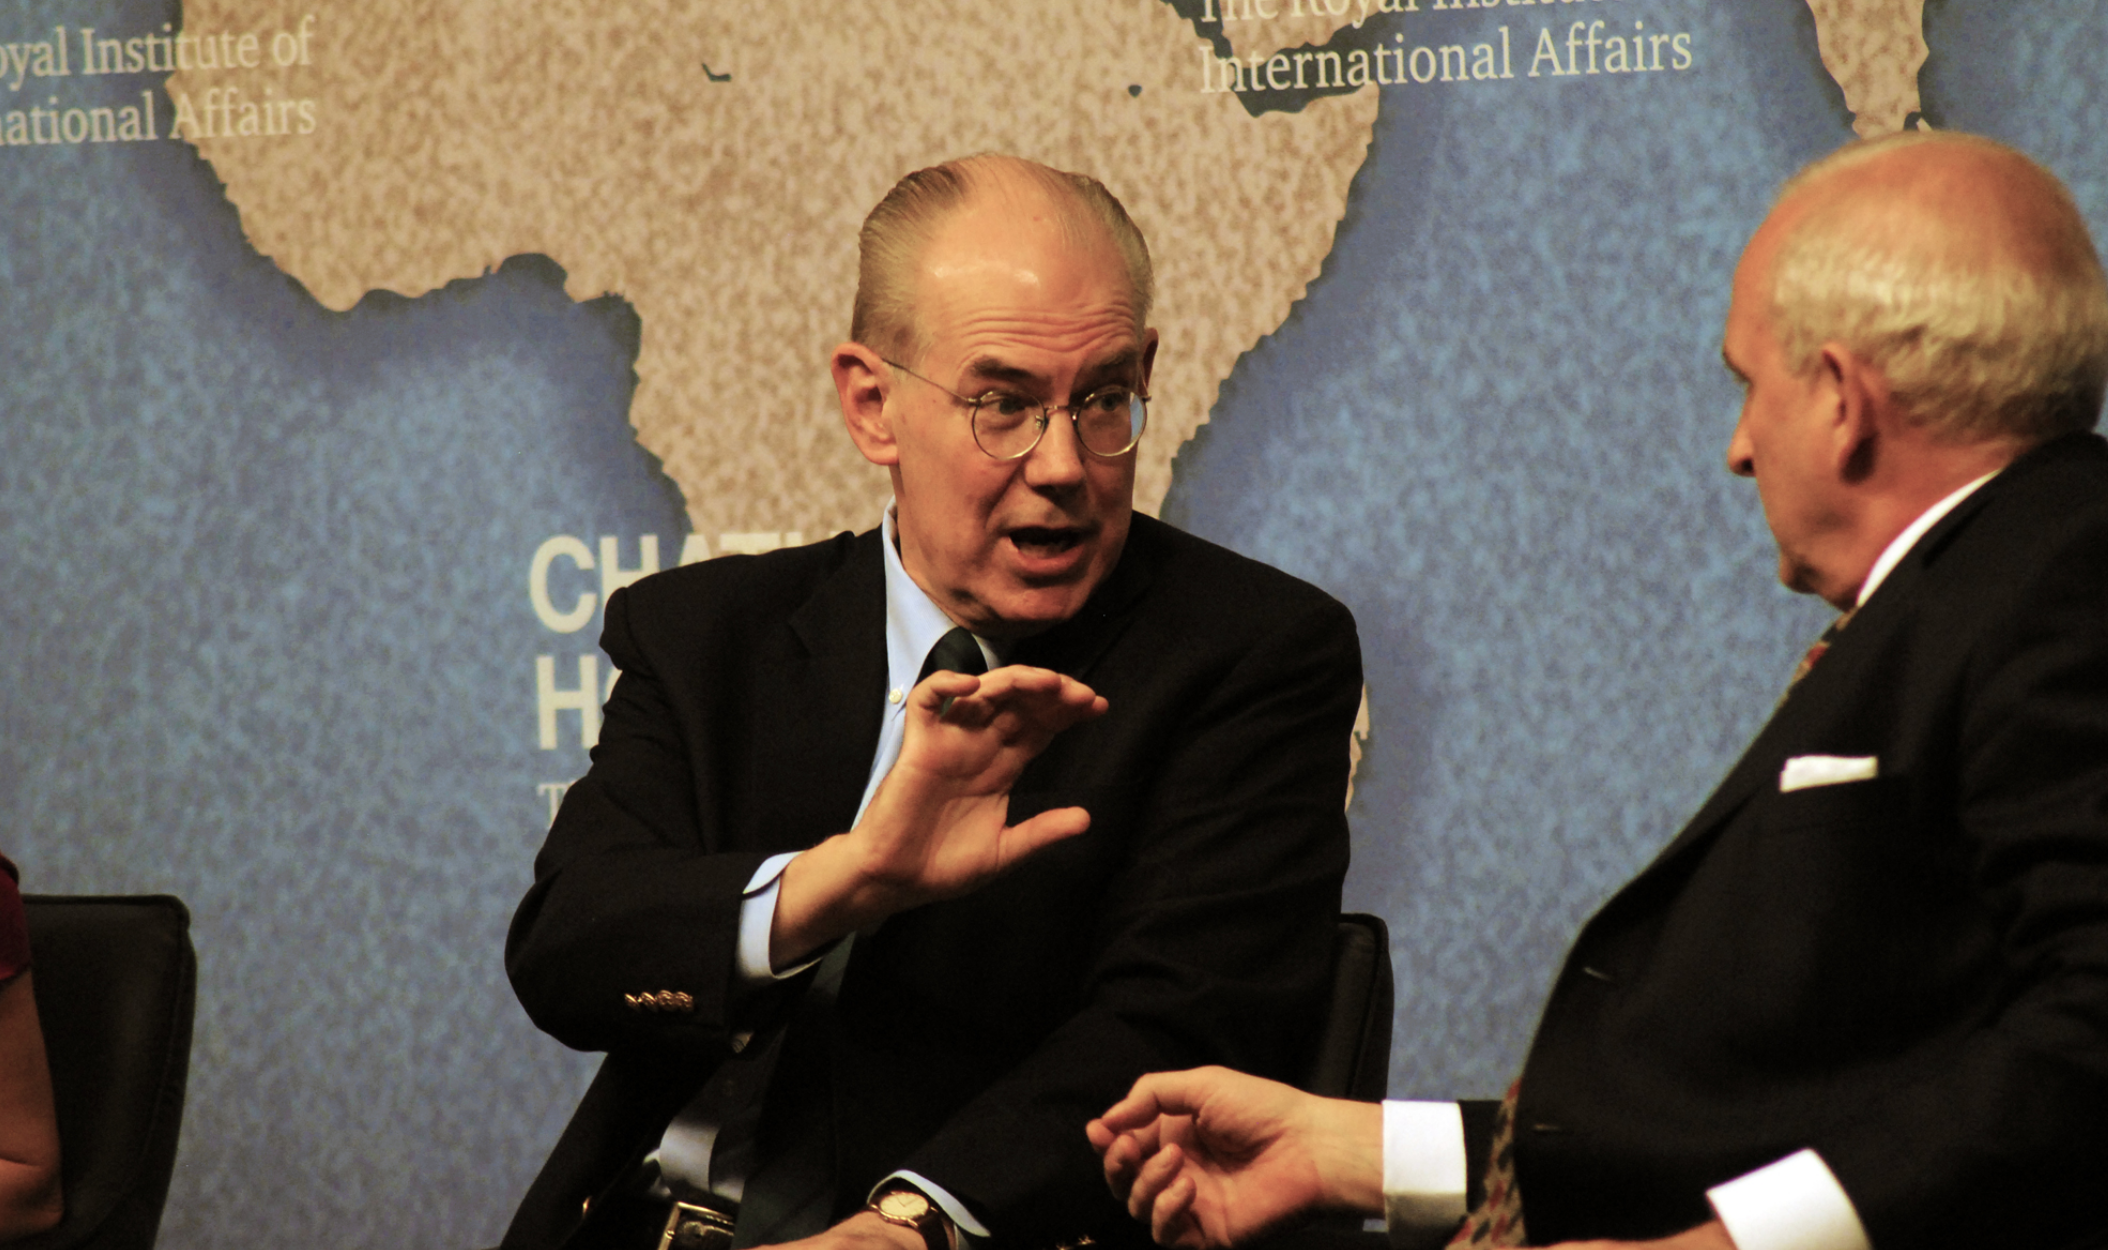 John Mearsheimer: How to Know When a Country is Behaving Rationally